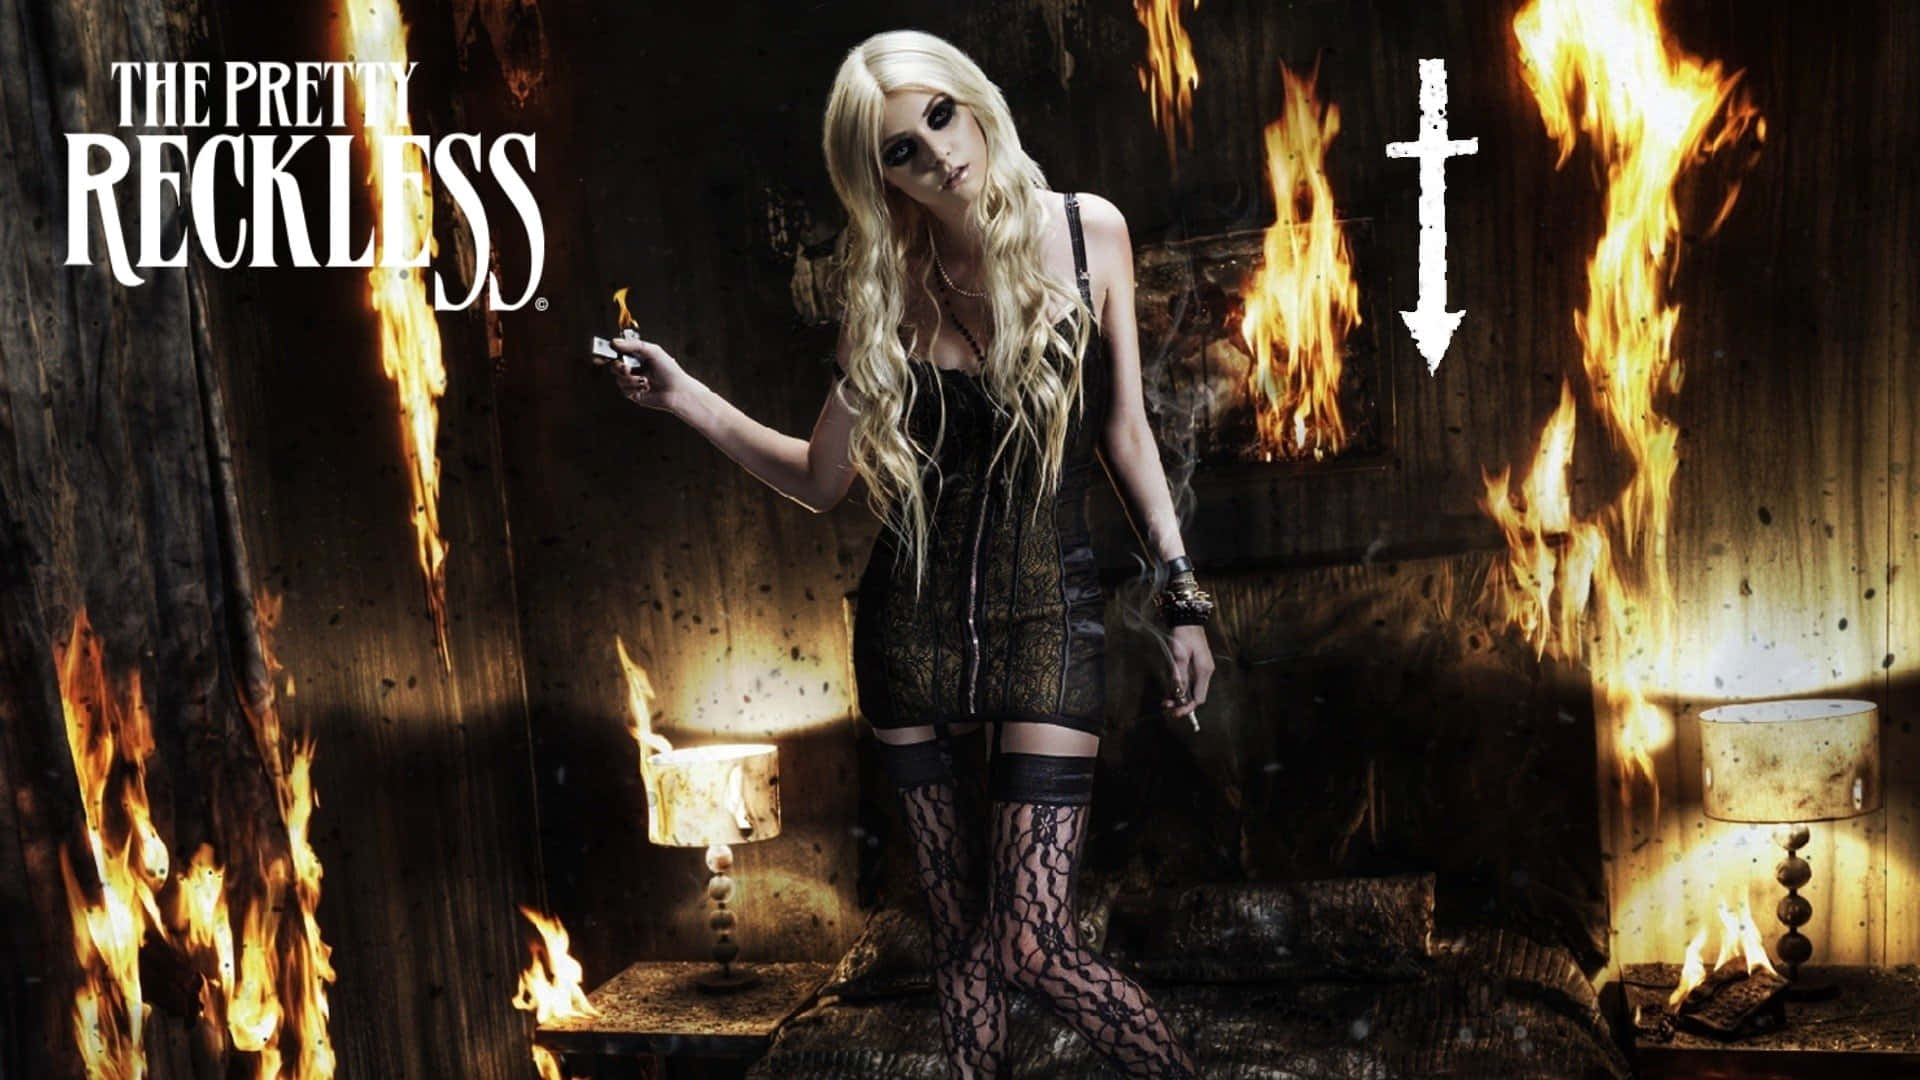 The Pretty Reckless Band Lead Singer Wallpaper